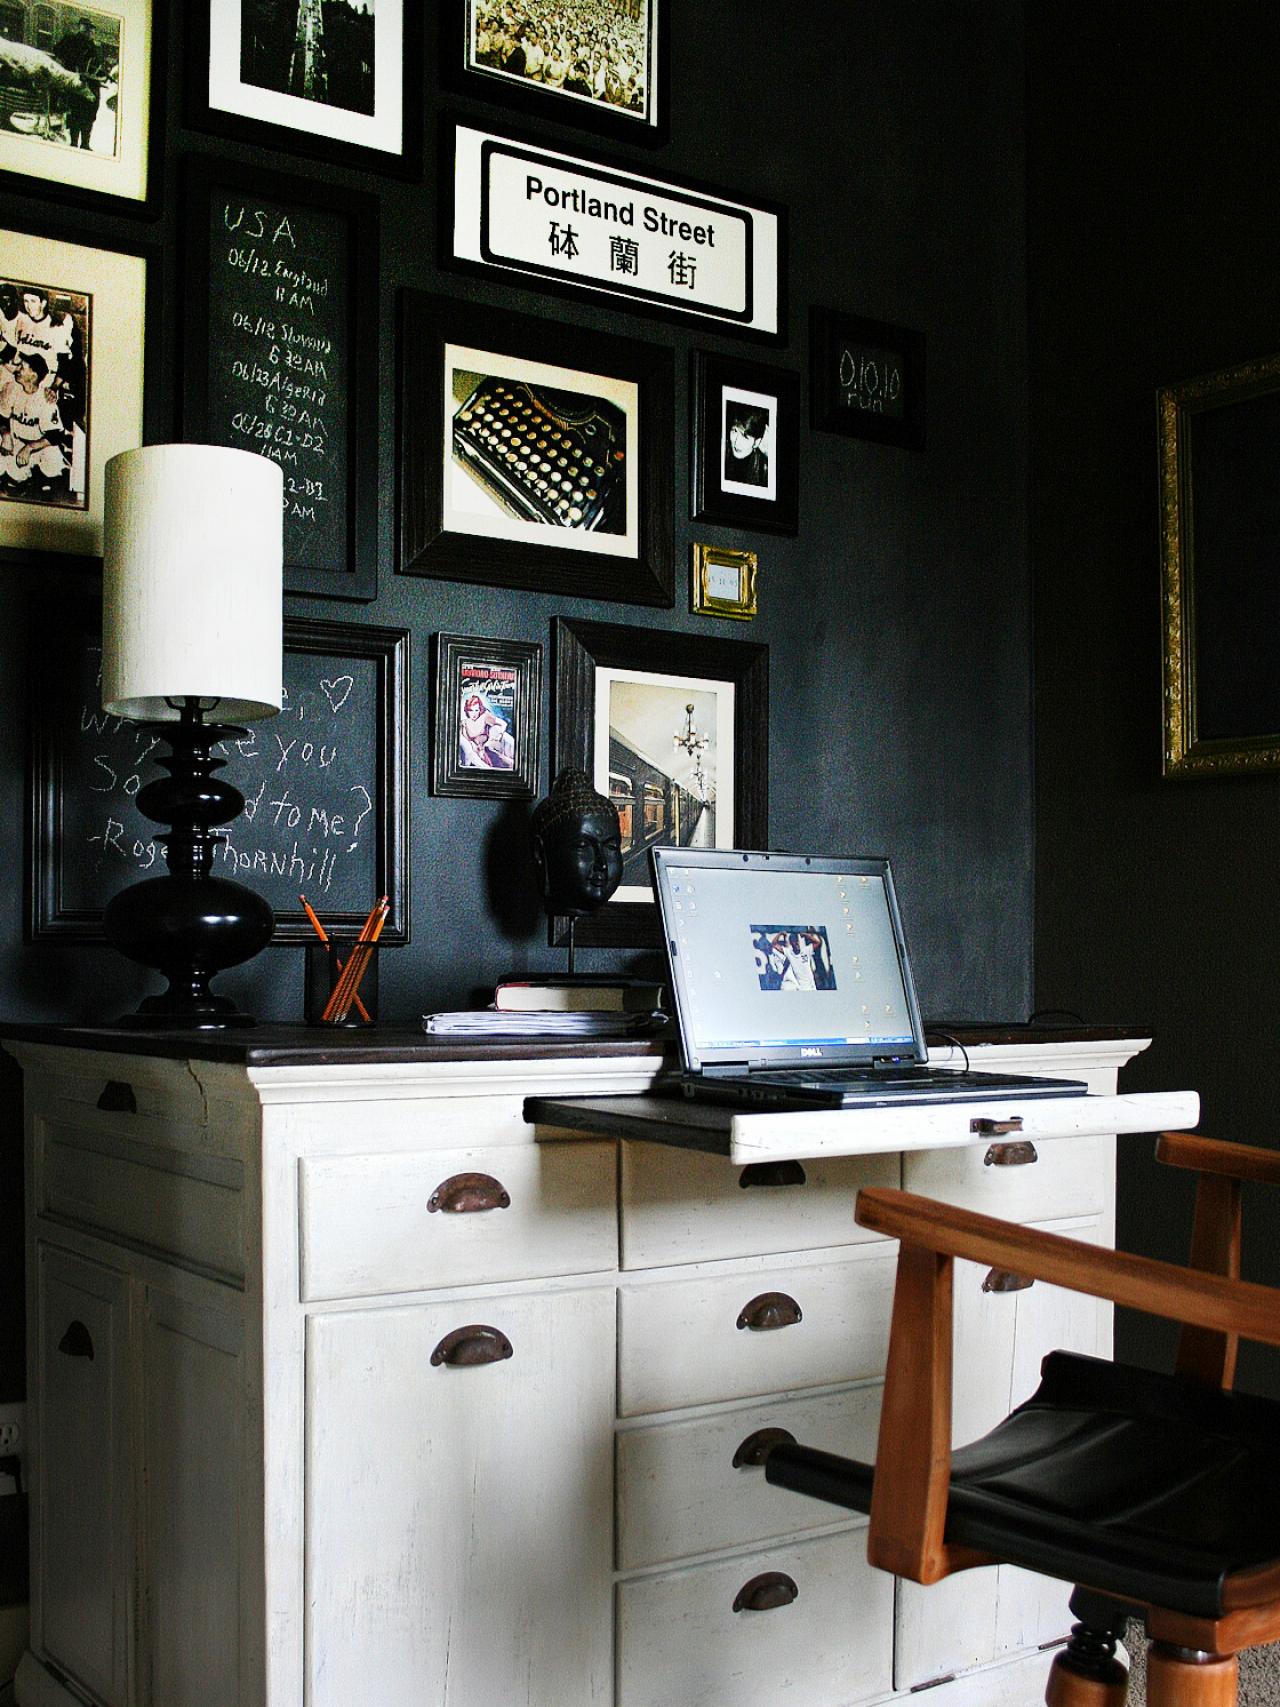 8 Smart Ideas For A Stylish And Organized Home Office Hgtv S Decorating Design Blog Hgtv